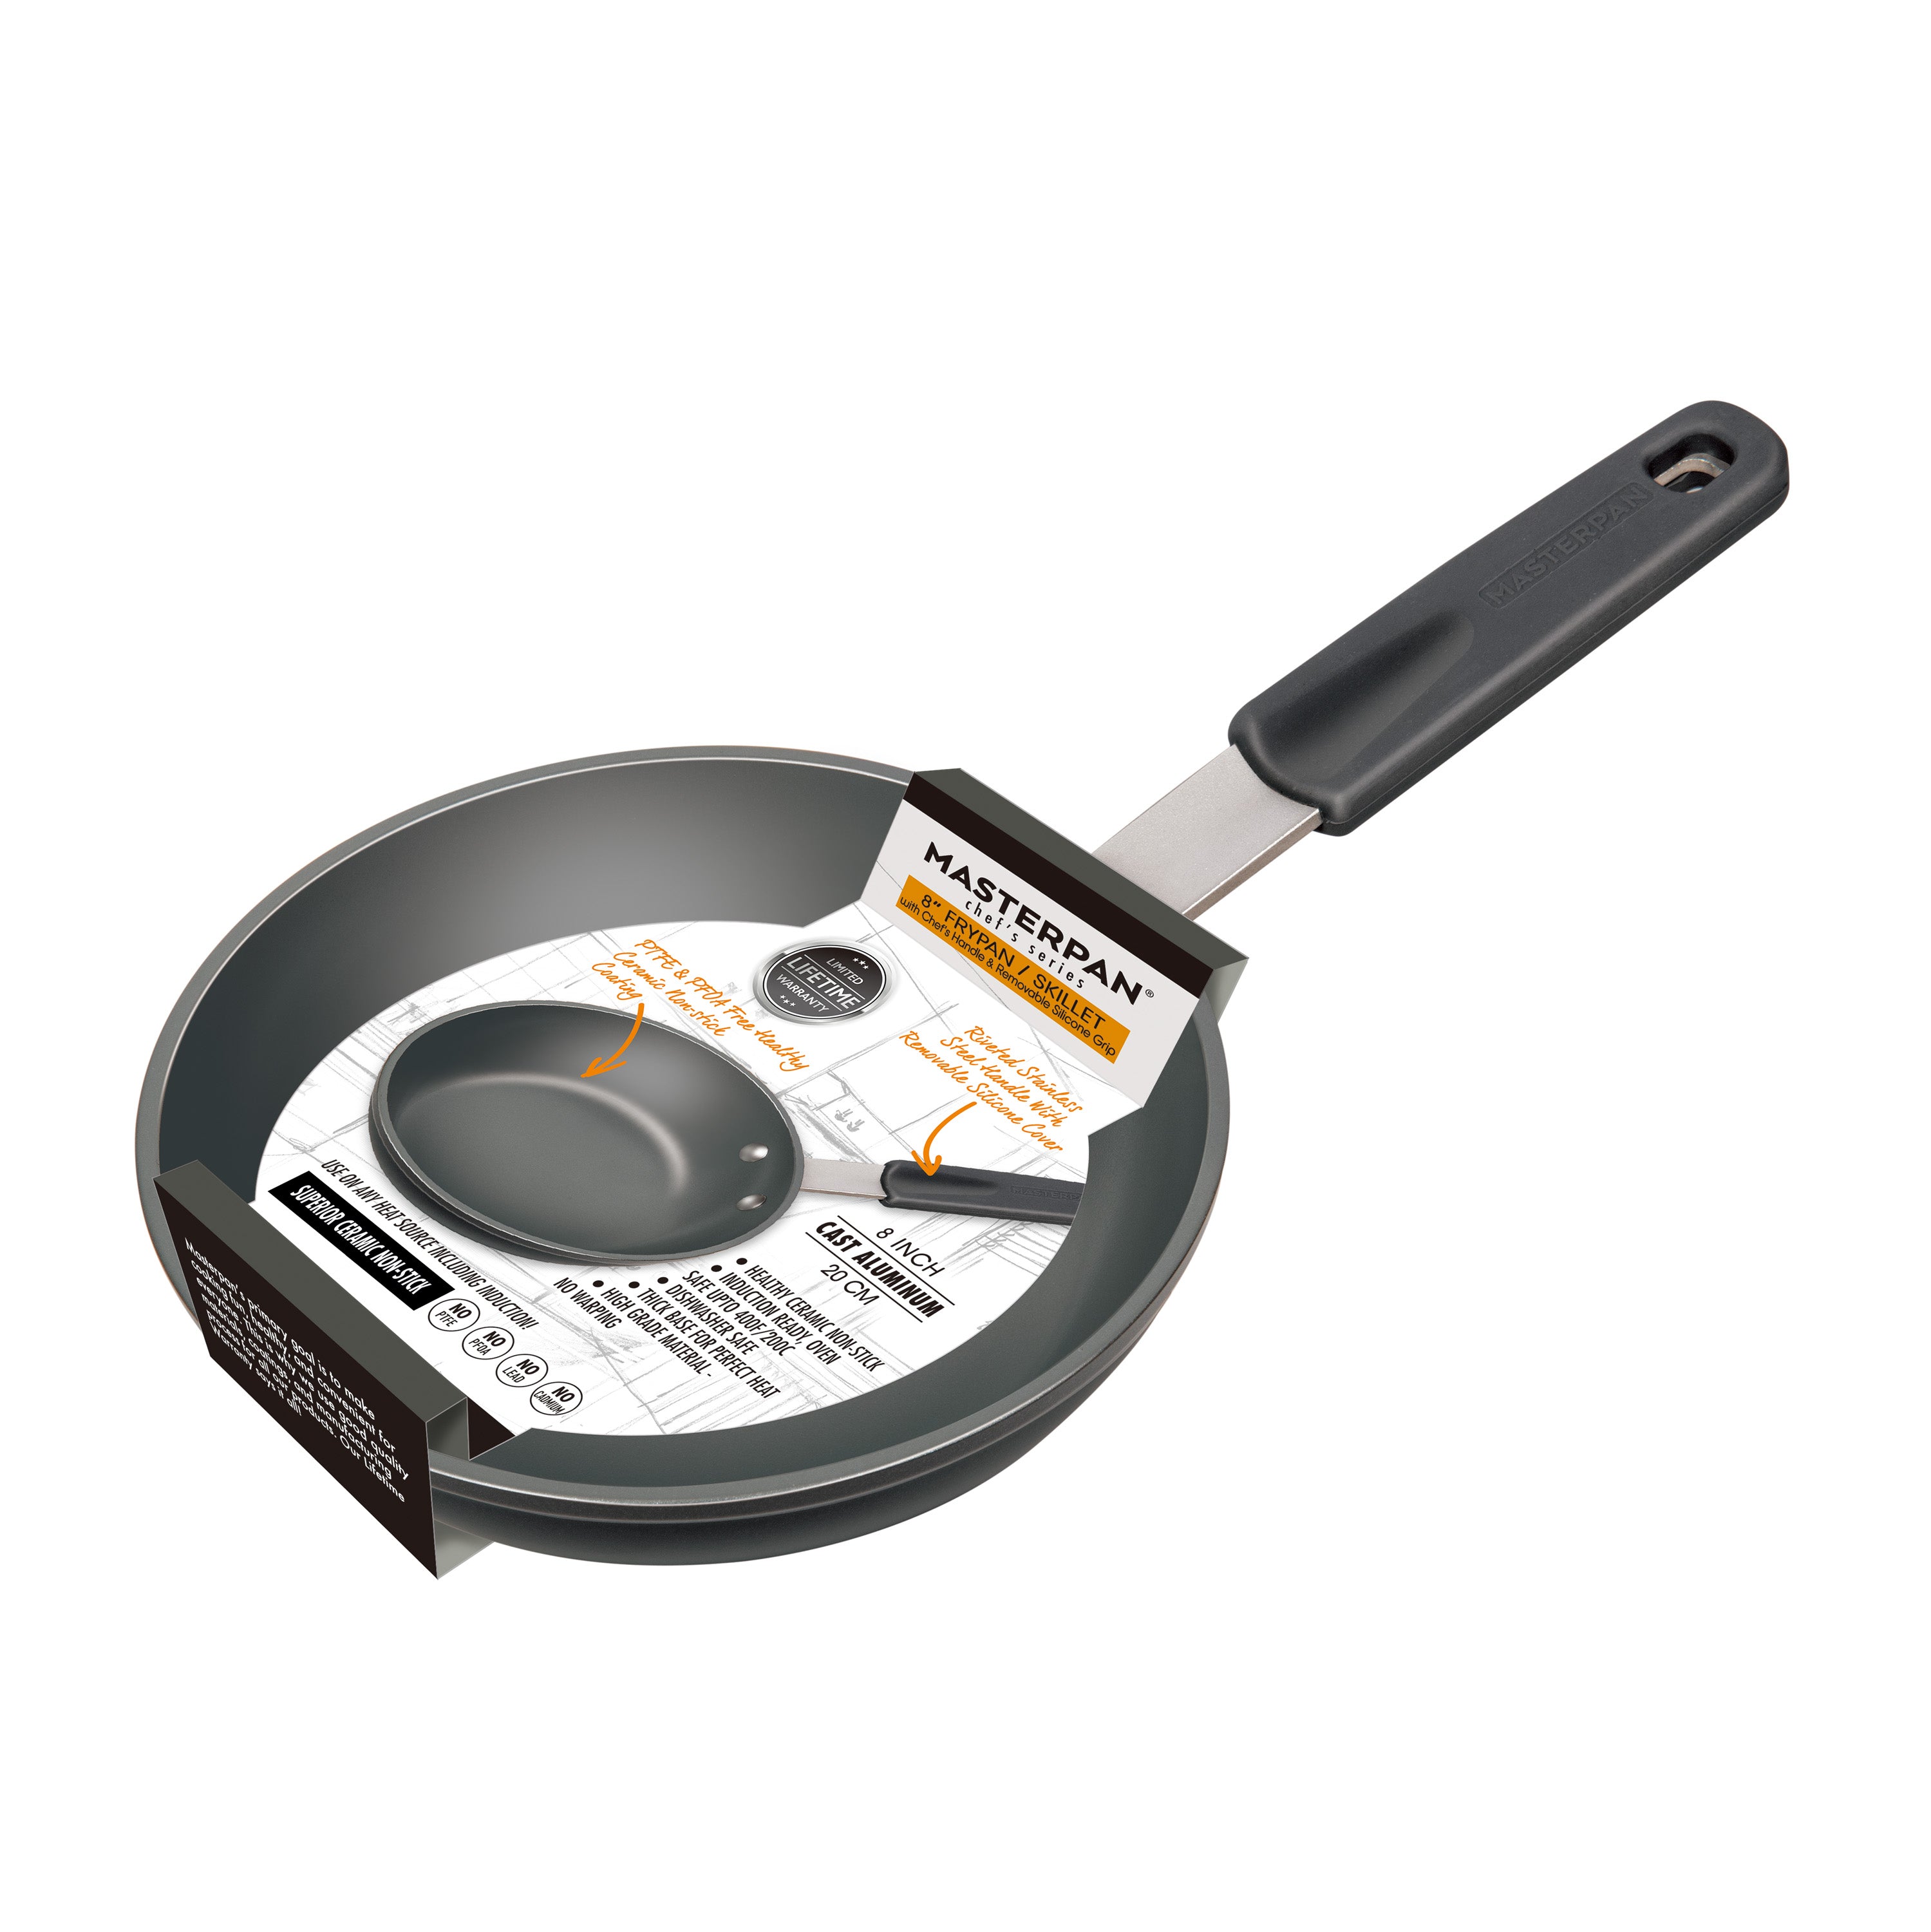 MASTERPAN Ceramic Nonstick Frypan & Skillet with Chefs Handle, 8